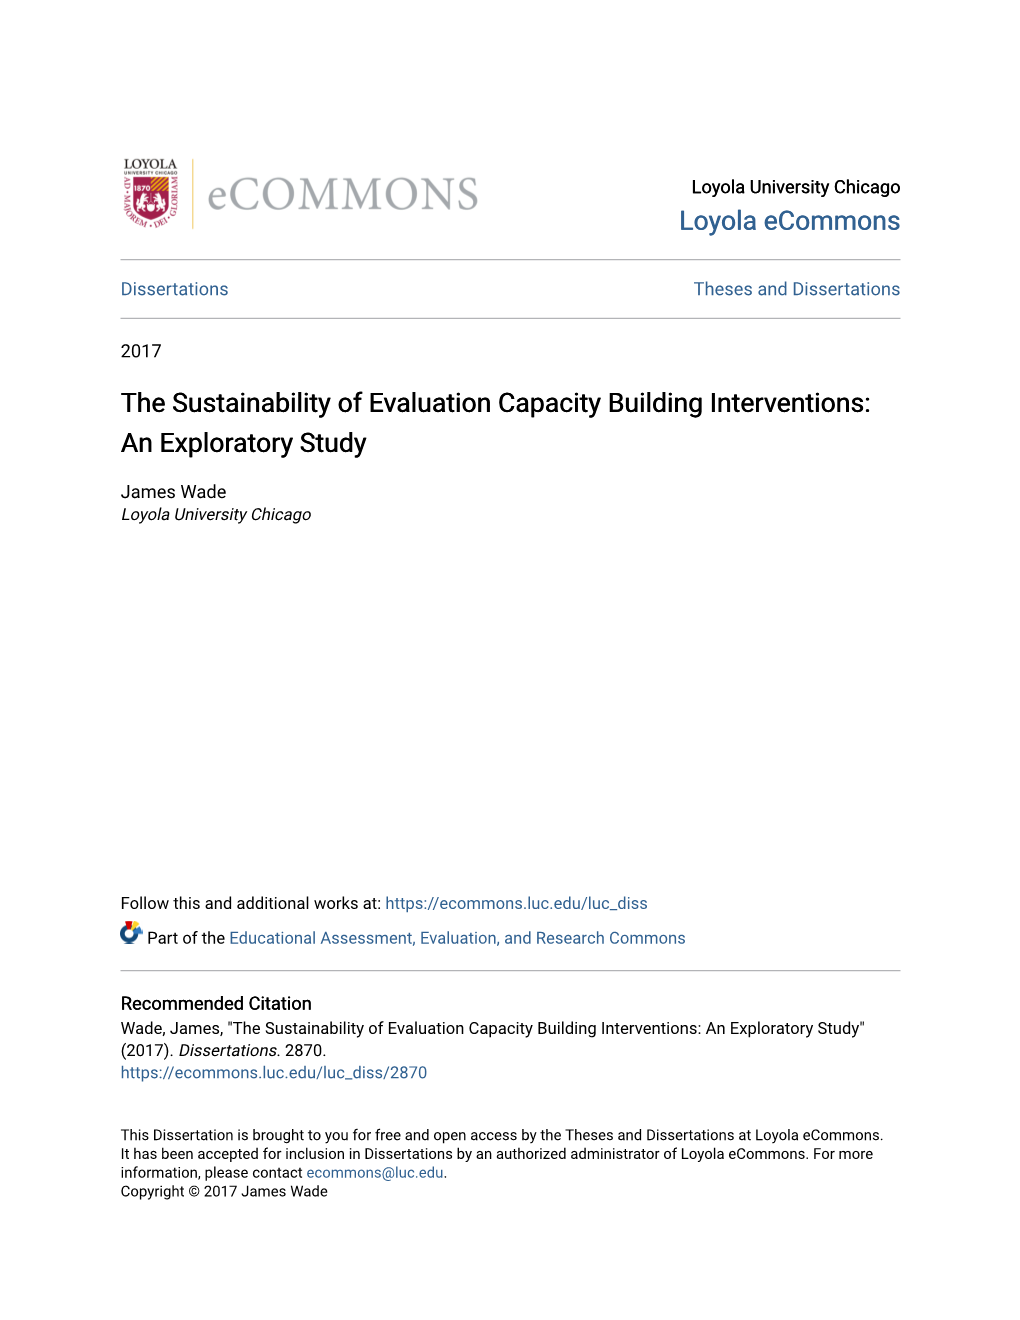 The Sustainability of Evaluation Capacity Building Interventions: an Exploratory Study